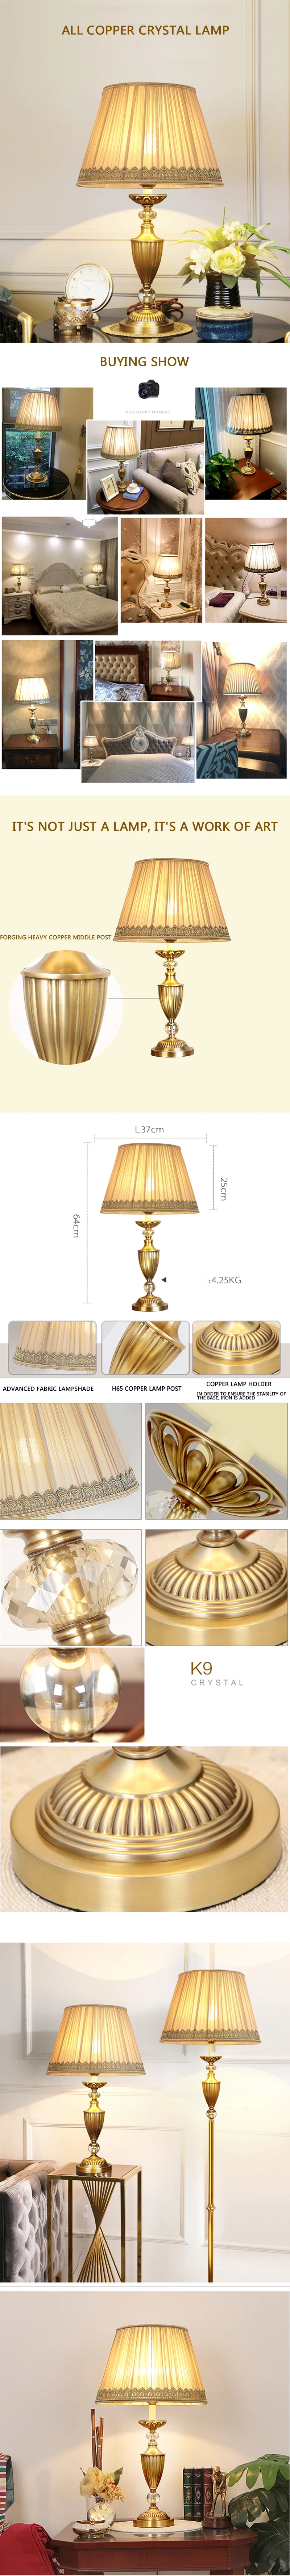 Home decor modern luxury bed side fabric shade metal table lamps & reading lamps for bedroom